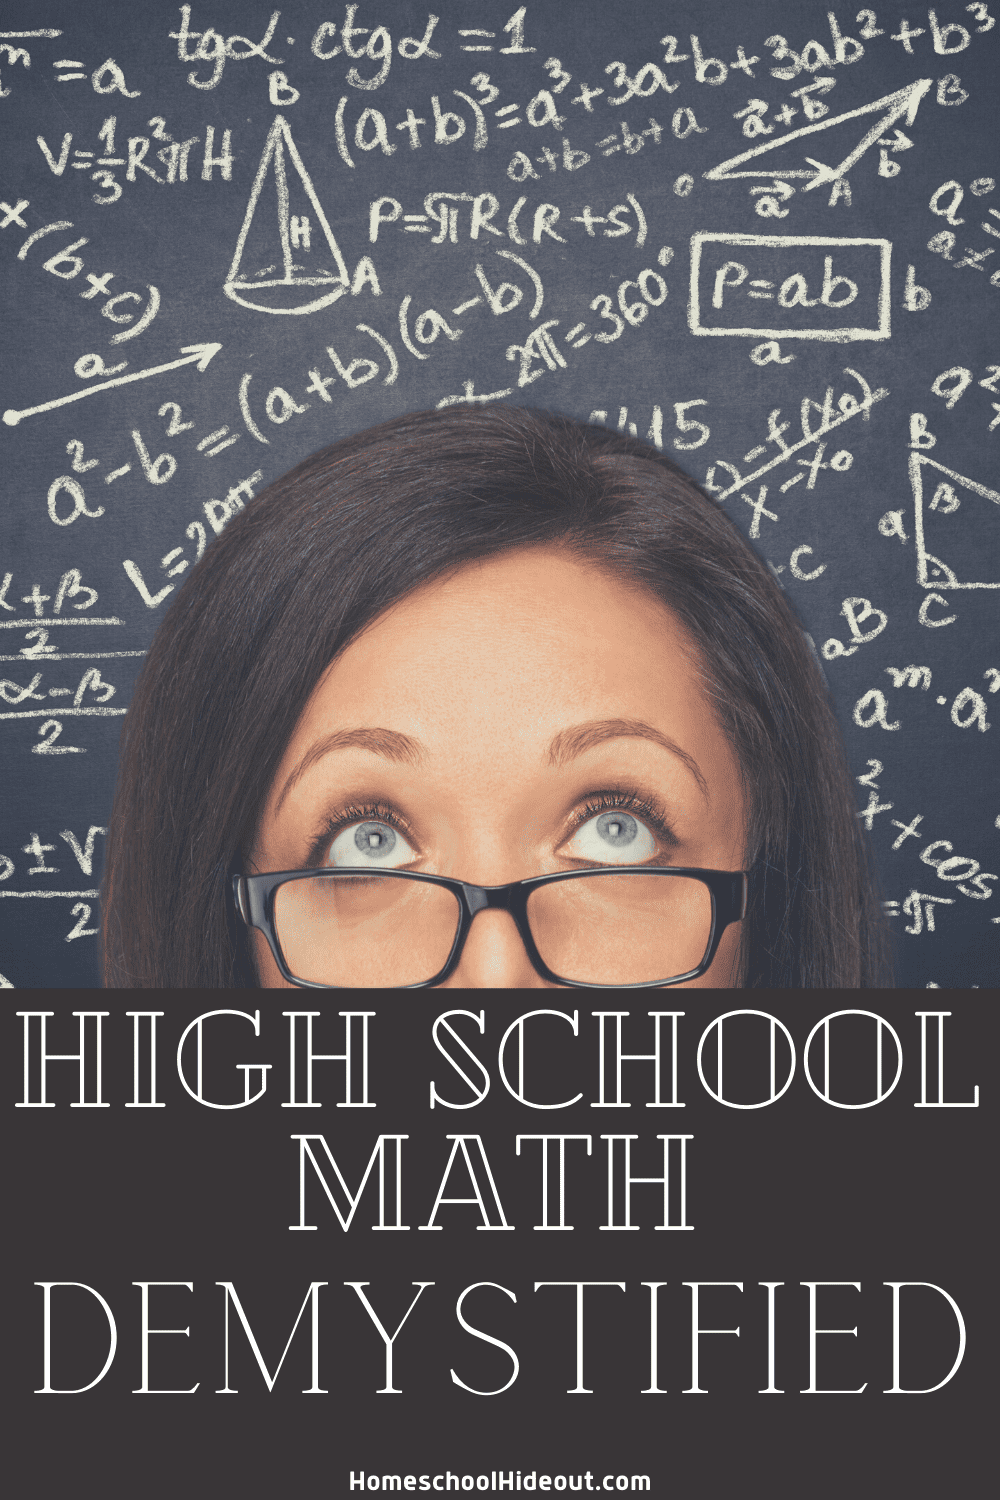 High school math is much easier when you allow it to be! I love these ideas.